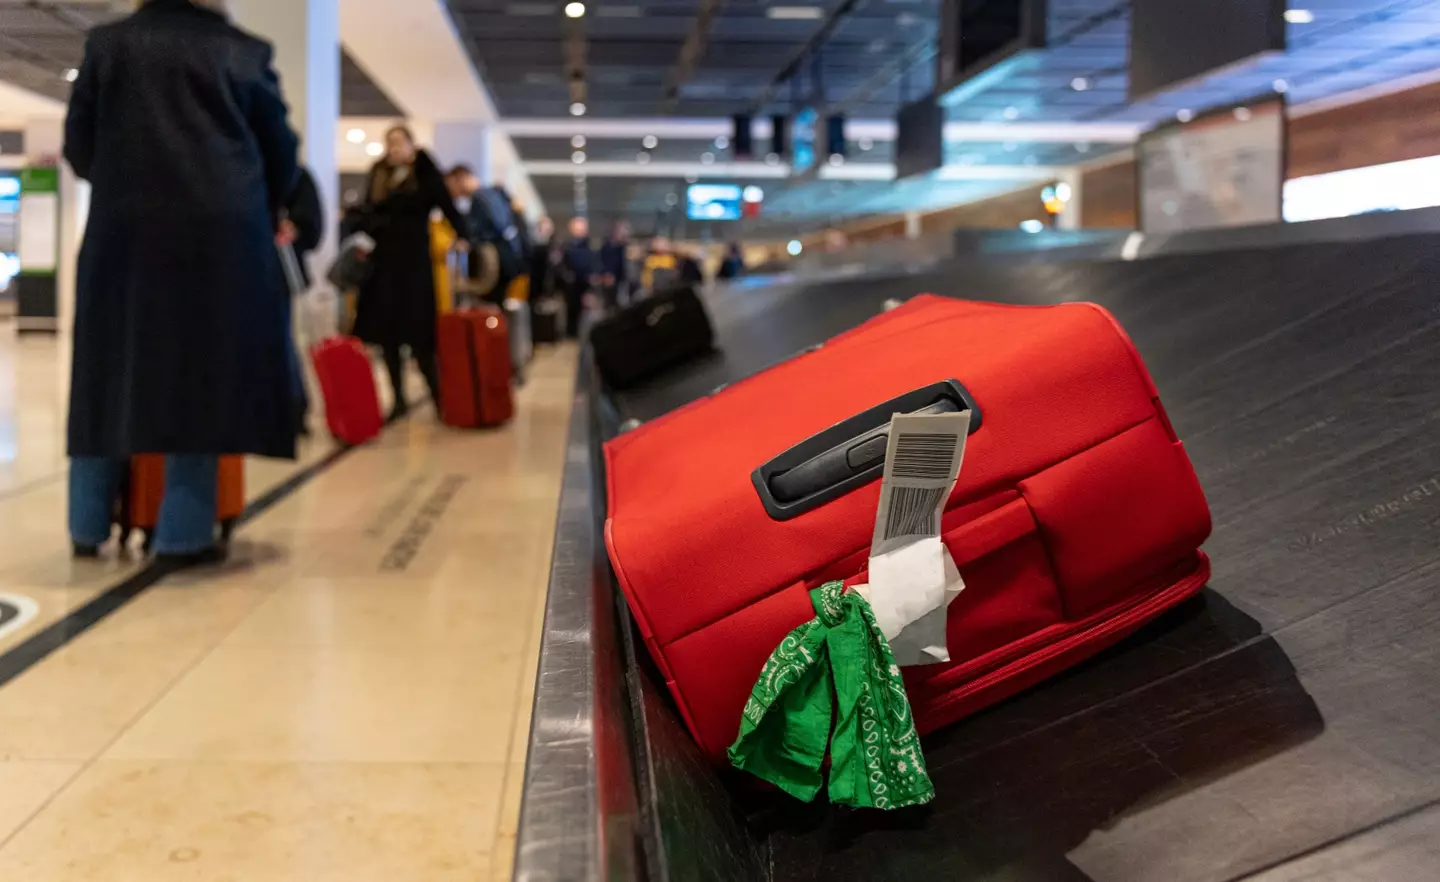 Holidaymakers might want to reconsider adding a ribbon to their suitcases (Getty stock image)